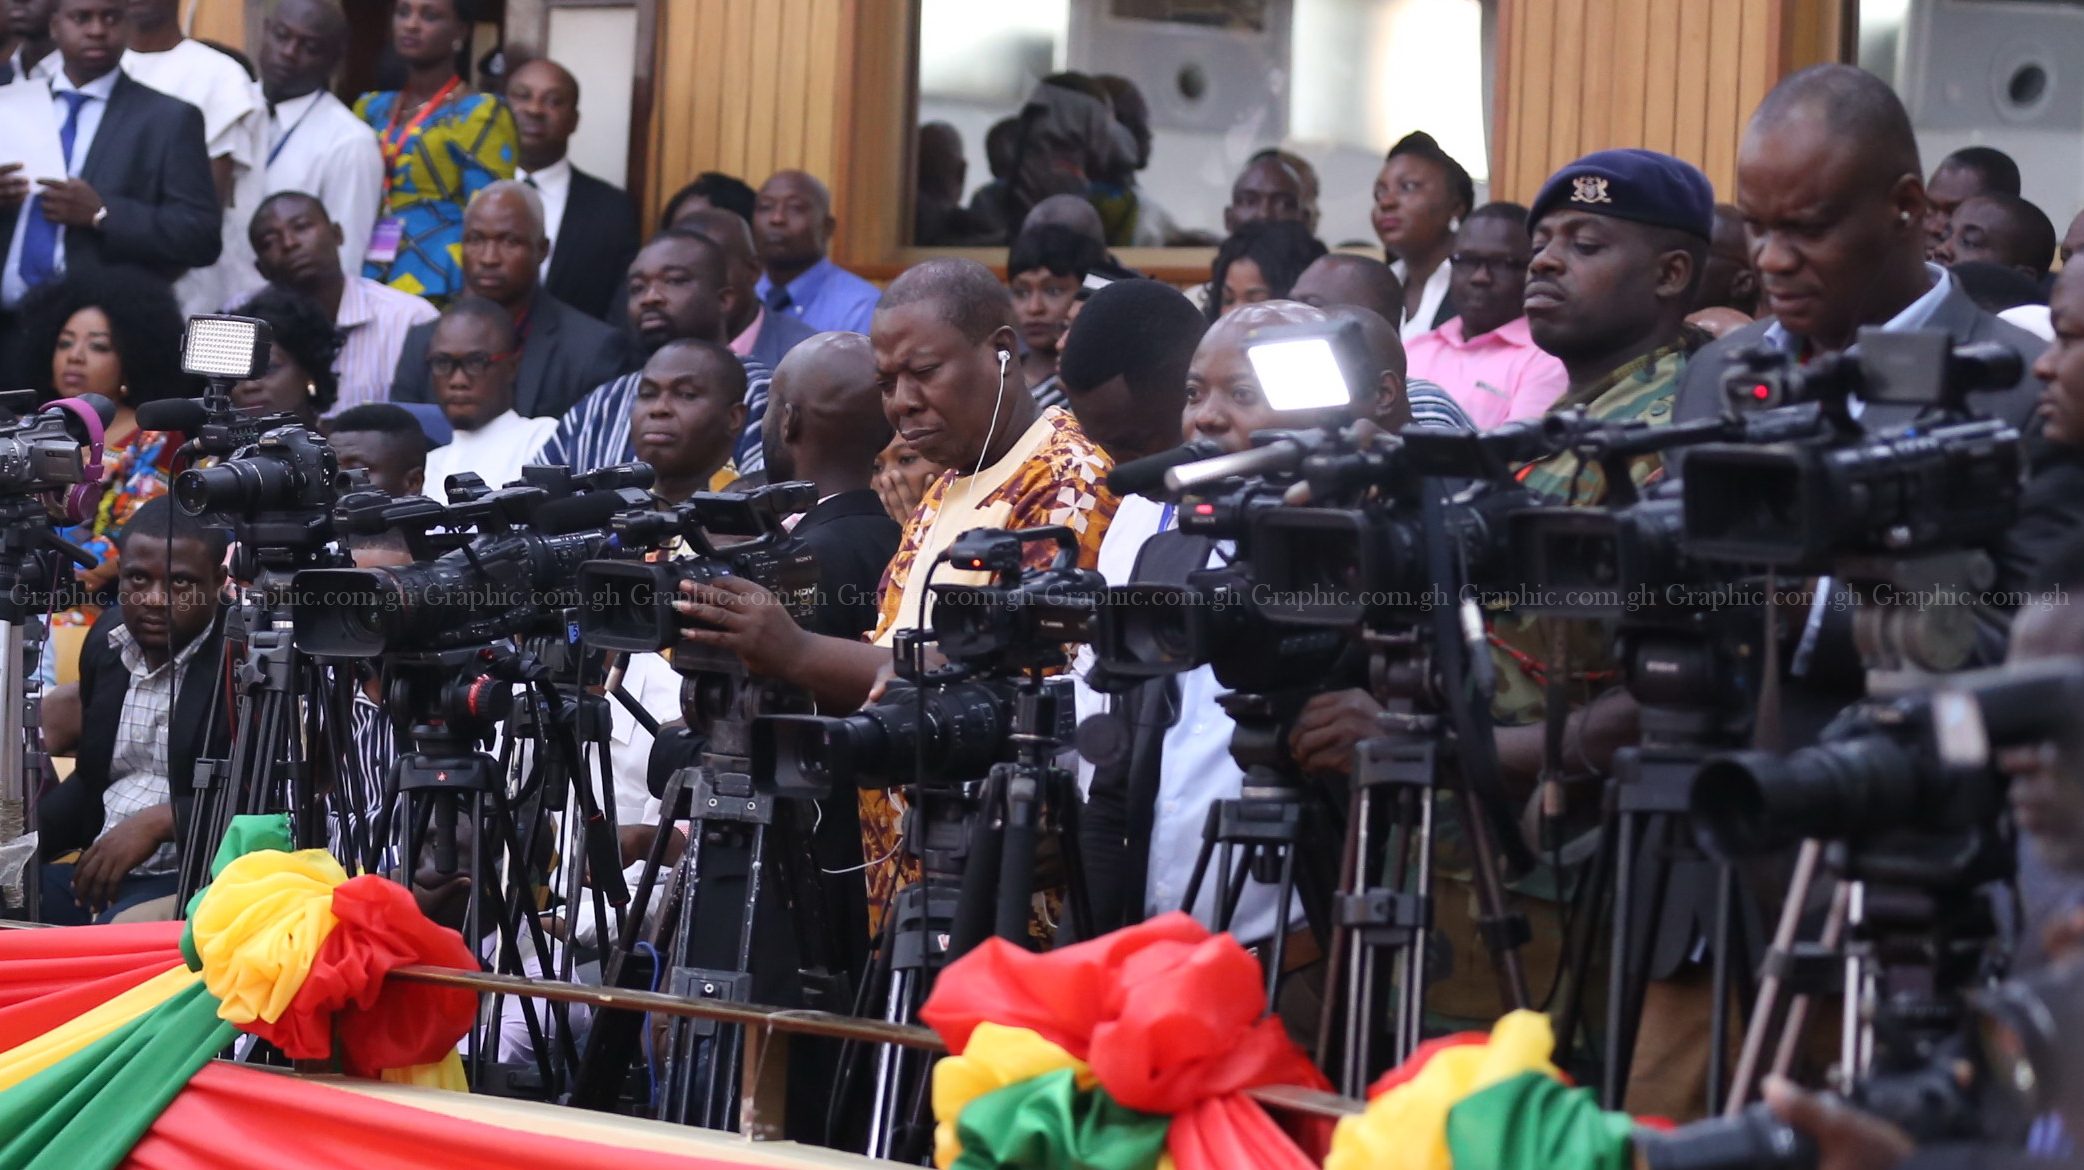 Ghana Journalists receive more threats & abuses on Twitter than any